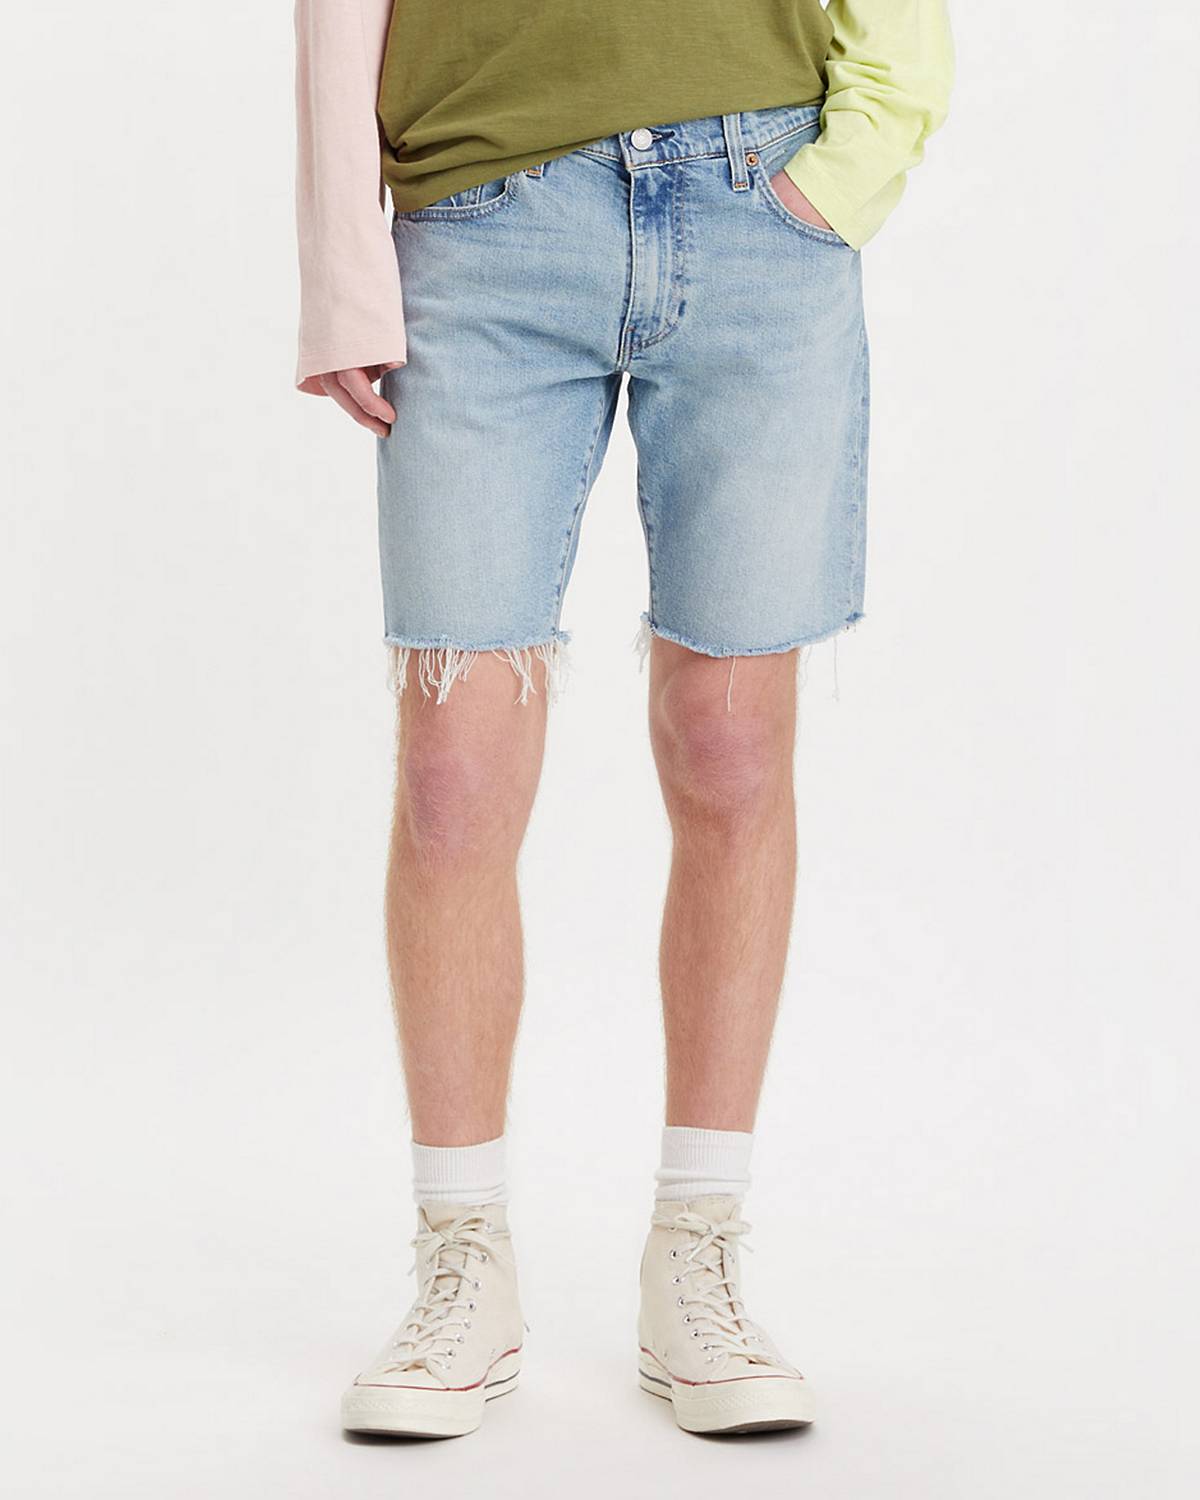 Slim Fit Cargo Shorts With Stretch | boohooMAN USA